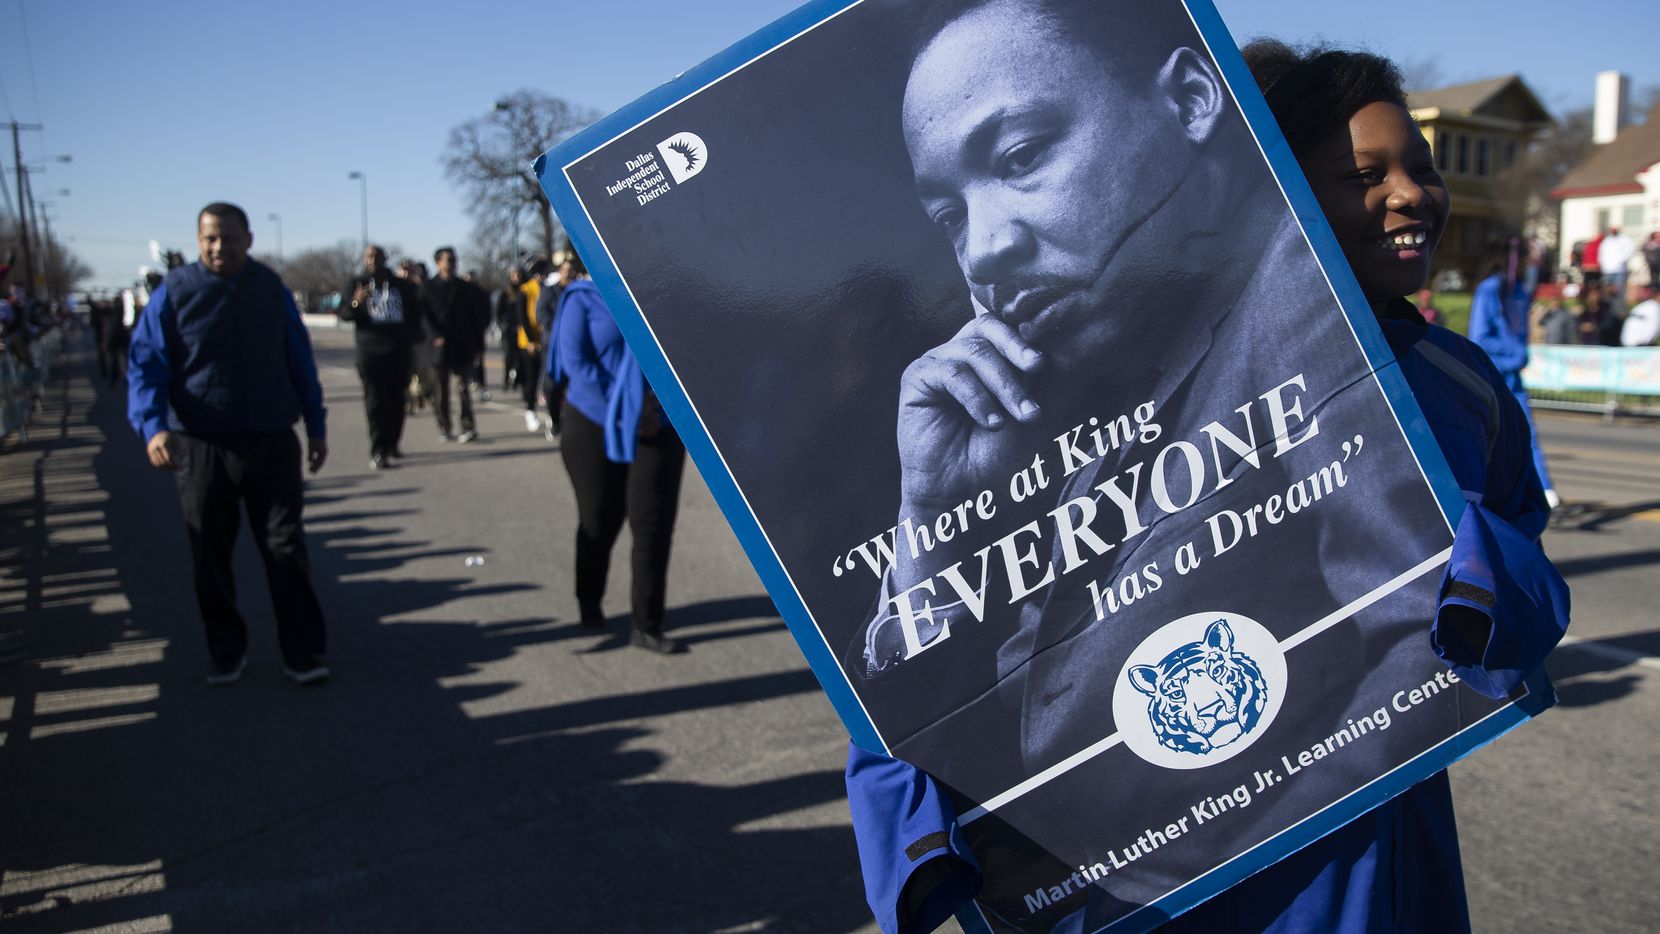 Community comes together to celebrate civil rights leader’s legacy at